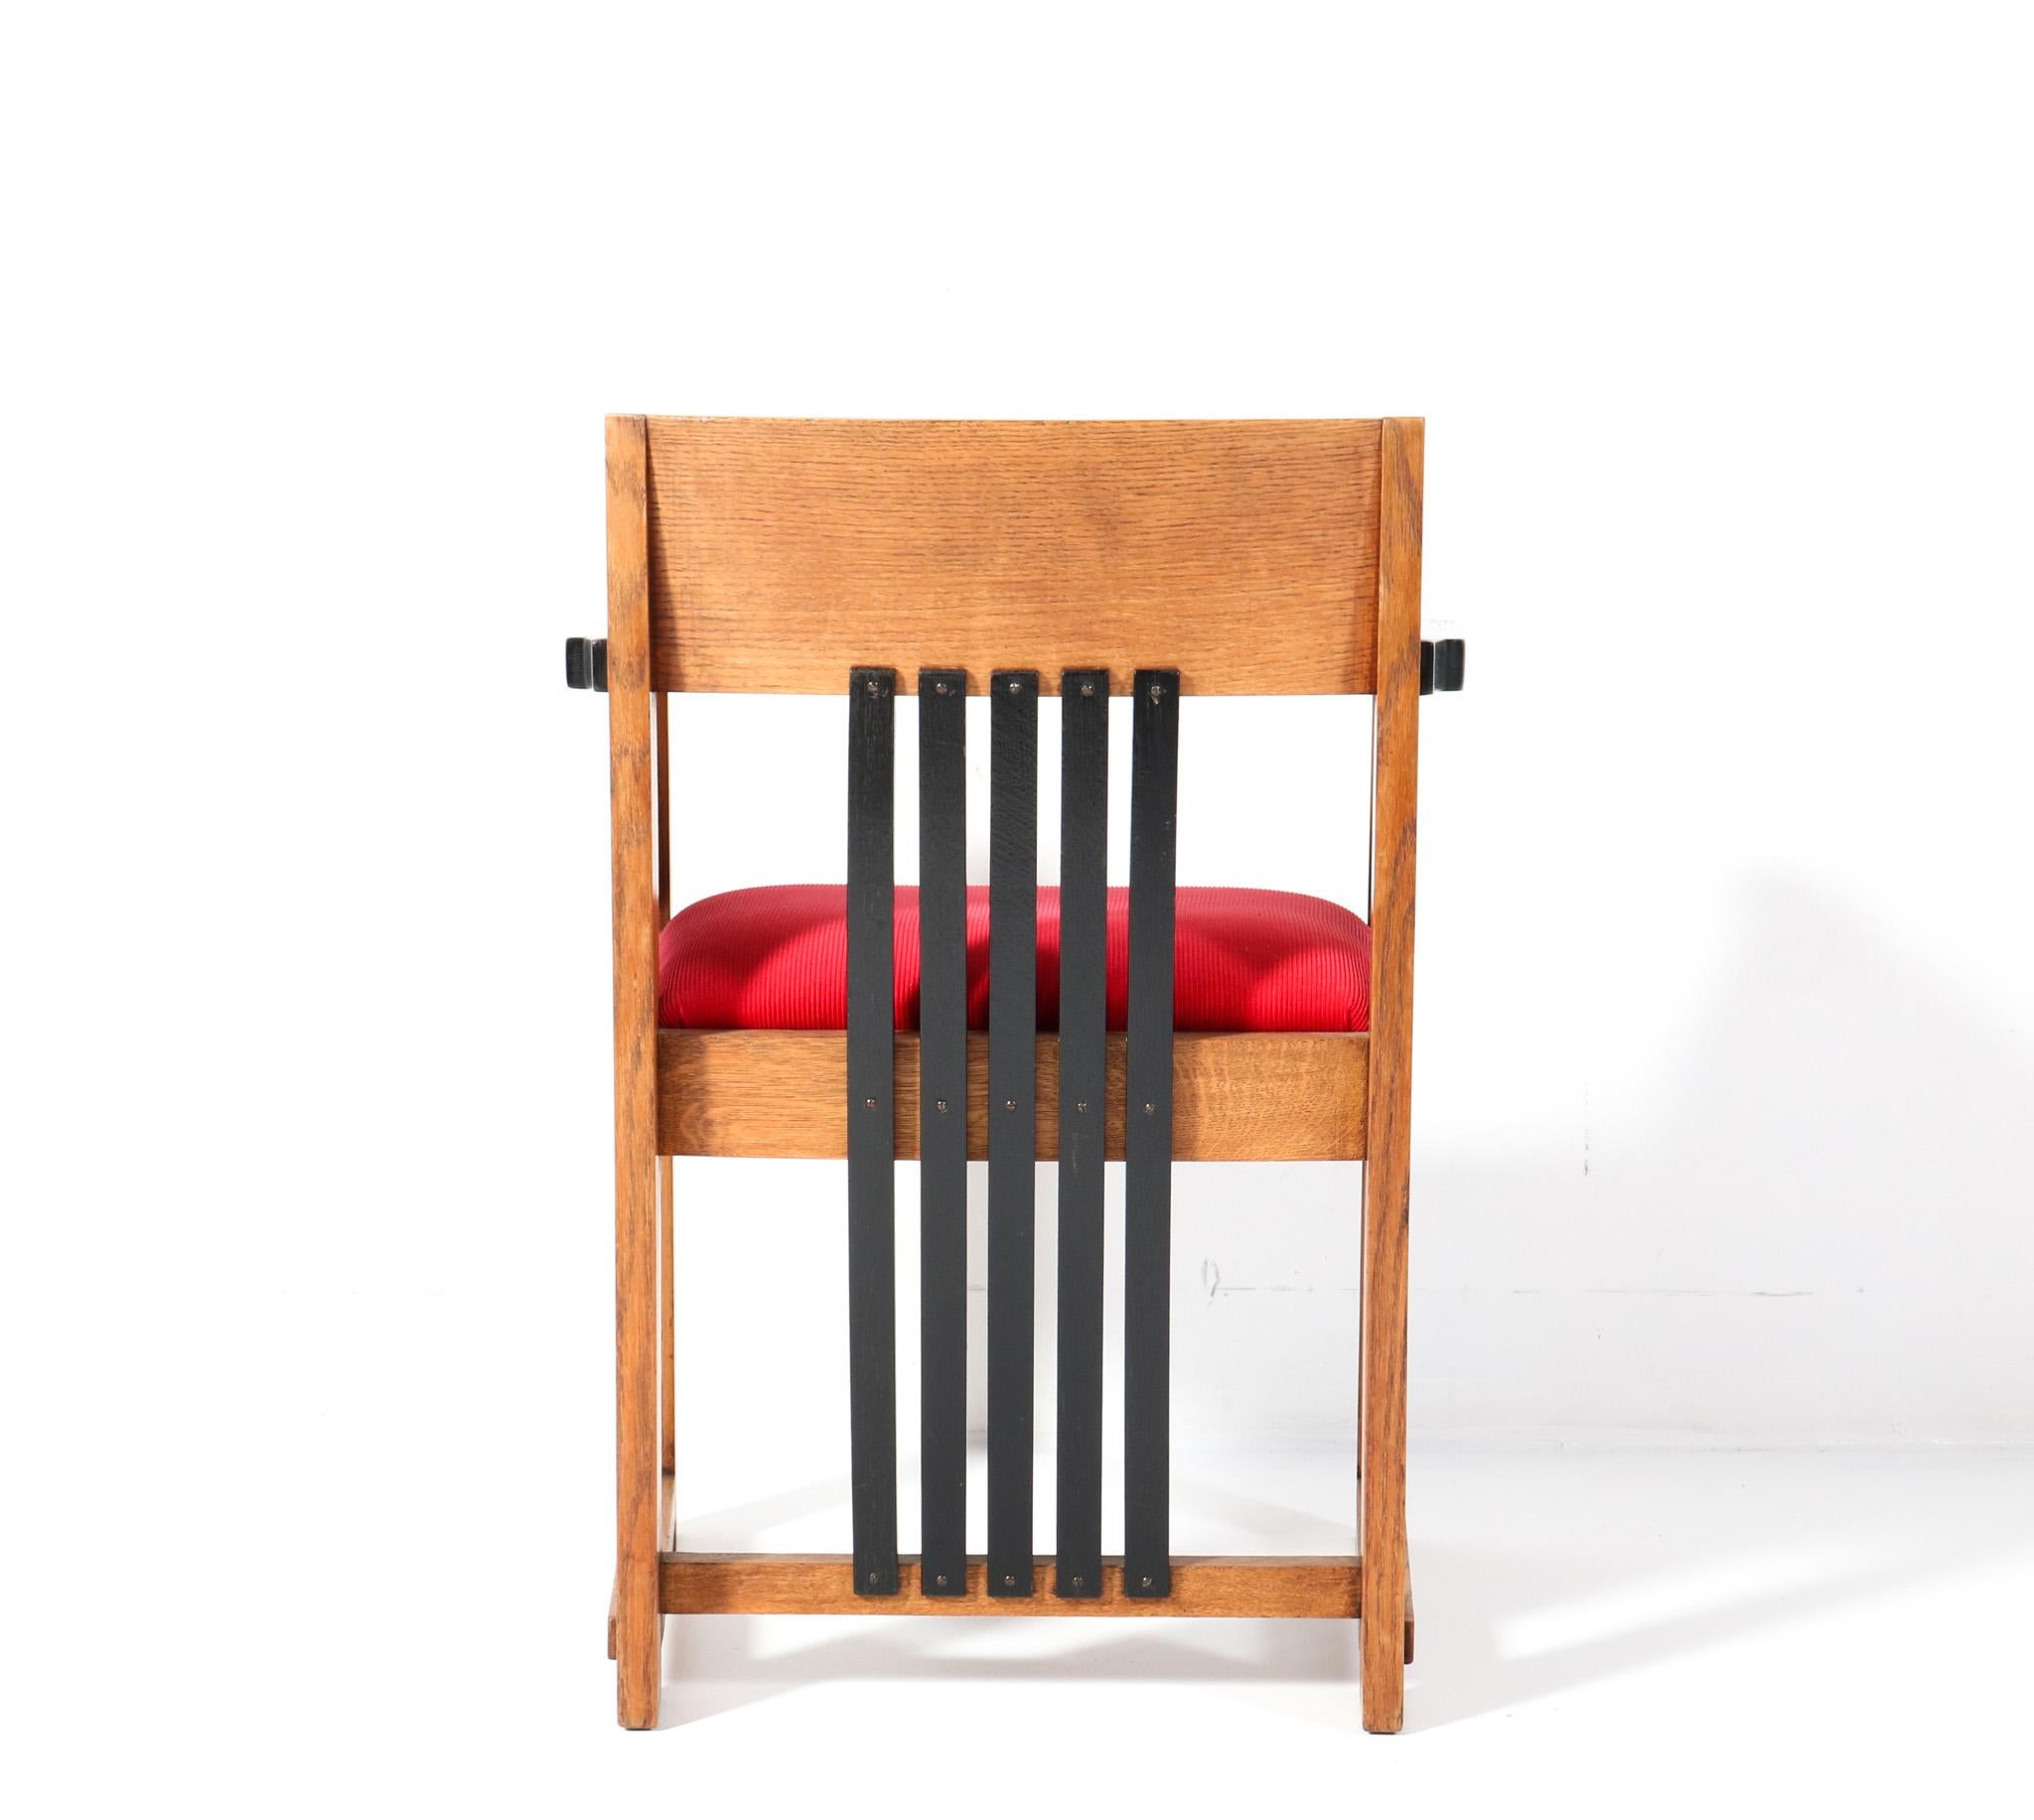  Art Deco Modernist Armchair by Hendrik Wouda for Pander, 1920s For Sale 1